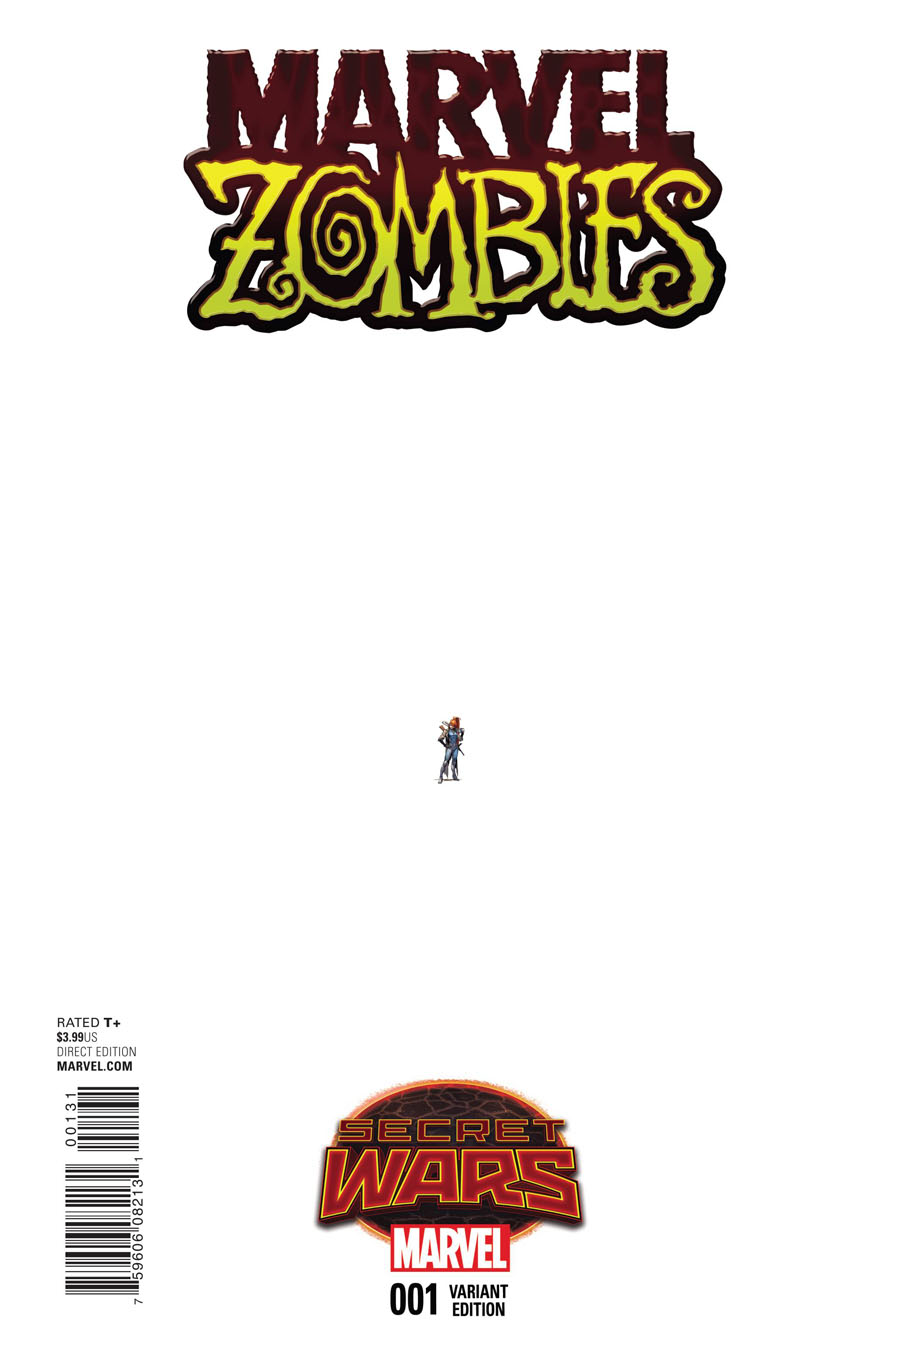 Marvel Zombies Vol 6 #1 Cover B Incentive Jerome Opena Ant-Sized Variant Cover (Secret Wars Battleworld Tie-In)